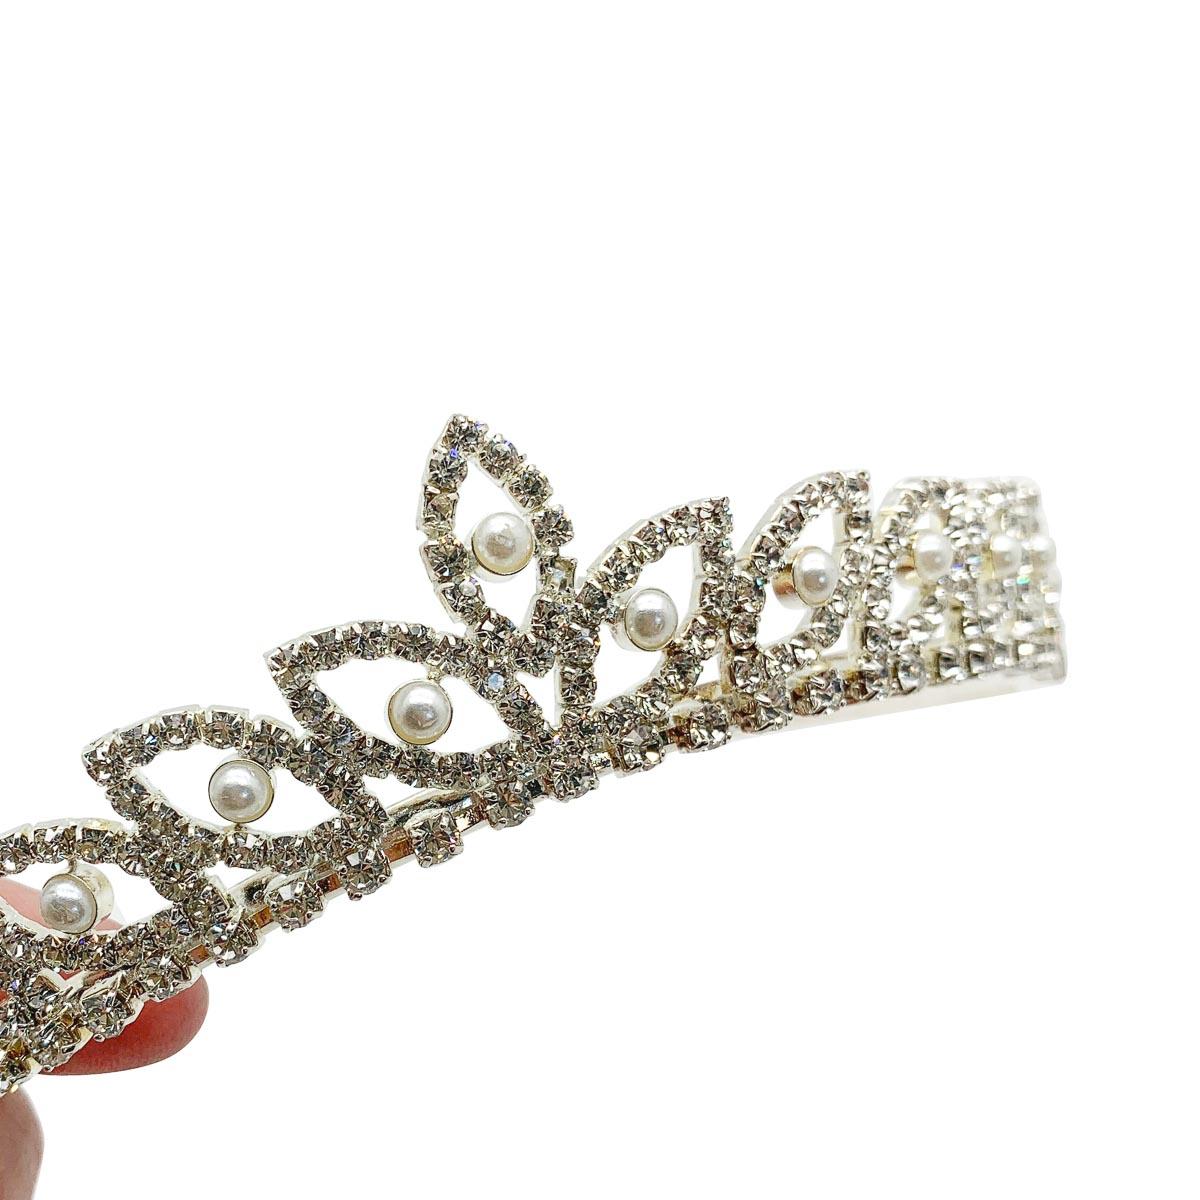 A vintage pearl marquise tiara. Enjoy the age-old tradition on your wedding day with this emblem that signifies the crowning of love.

Vintage Condition: Very good without damage or noteworthy wear.
Materials: silver plated metal, simulated pearls,